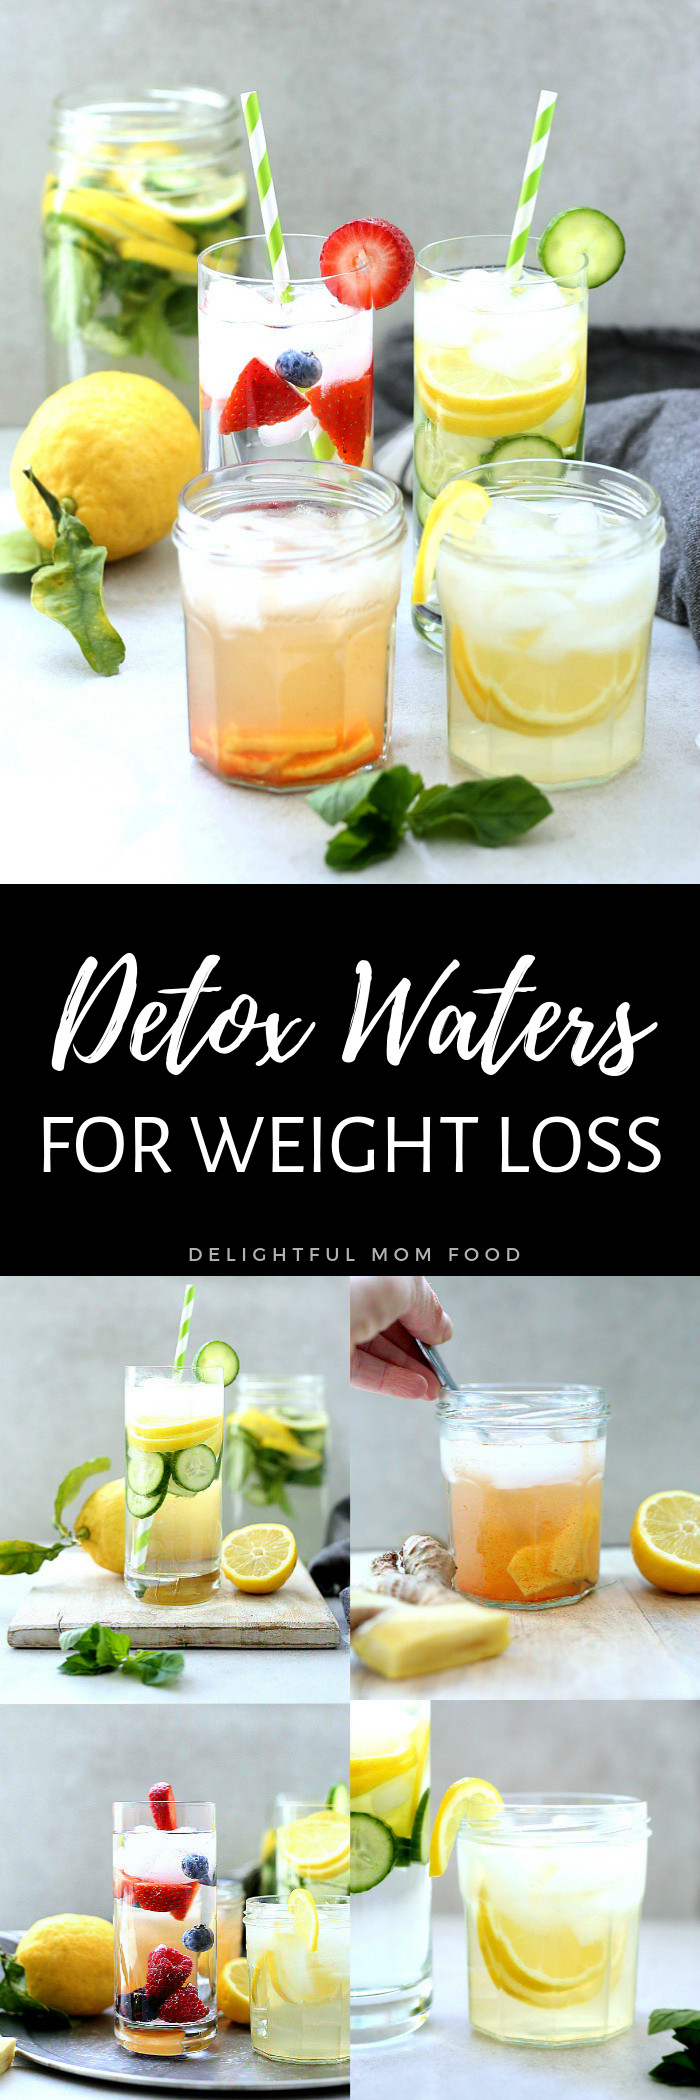 Weight Loss Detox Drinks Recipes
 4 Detox Water Recipes For Weight Loss & Body Cleanse